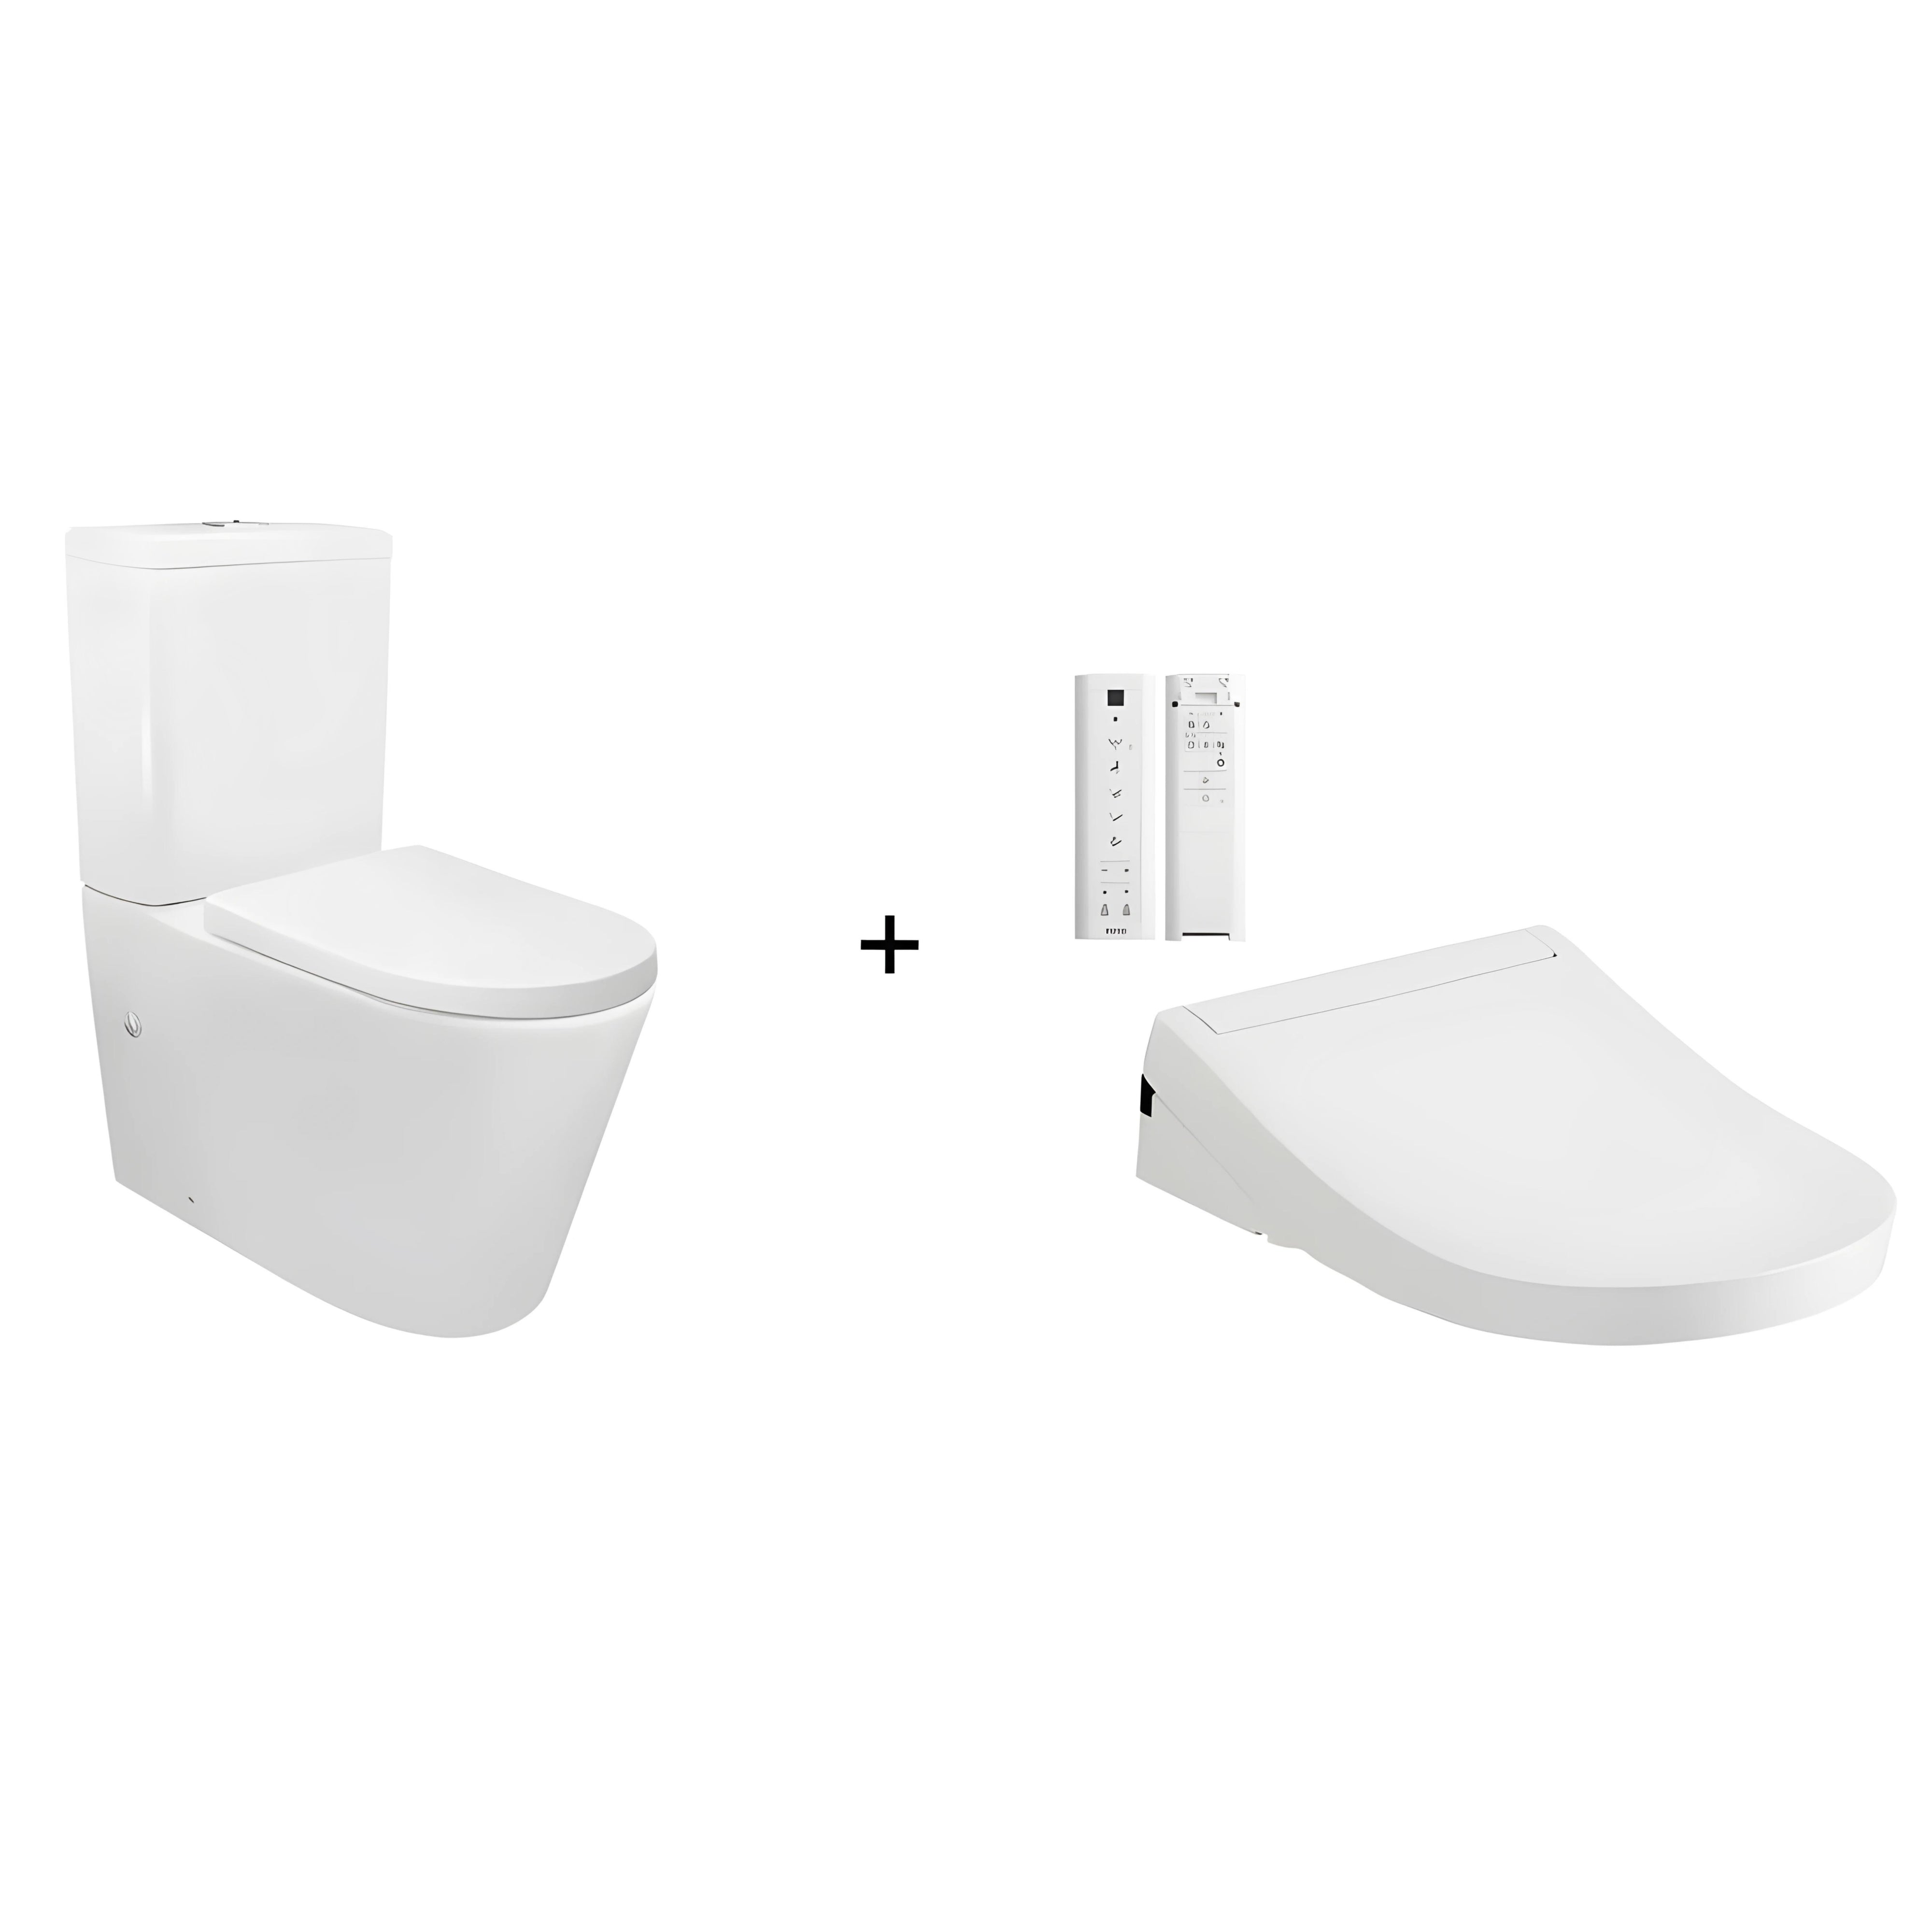 TOTO S5 WASHLET W/ REMOTE CONTROL AND TORNADO TOILET SUITE PACKAGE D-SHAPED GLOSS WHITE